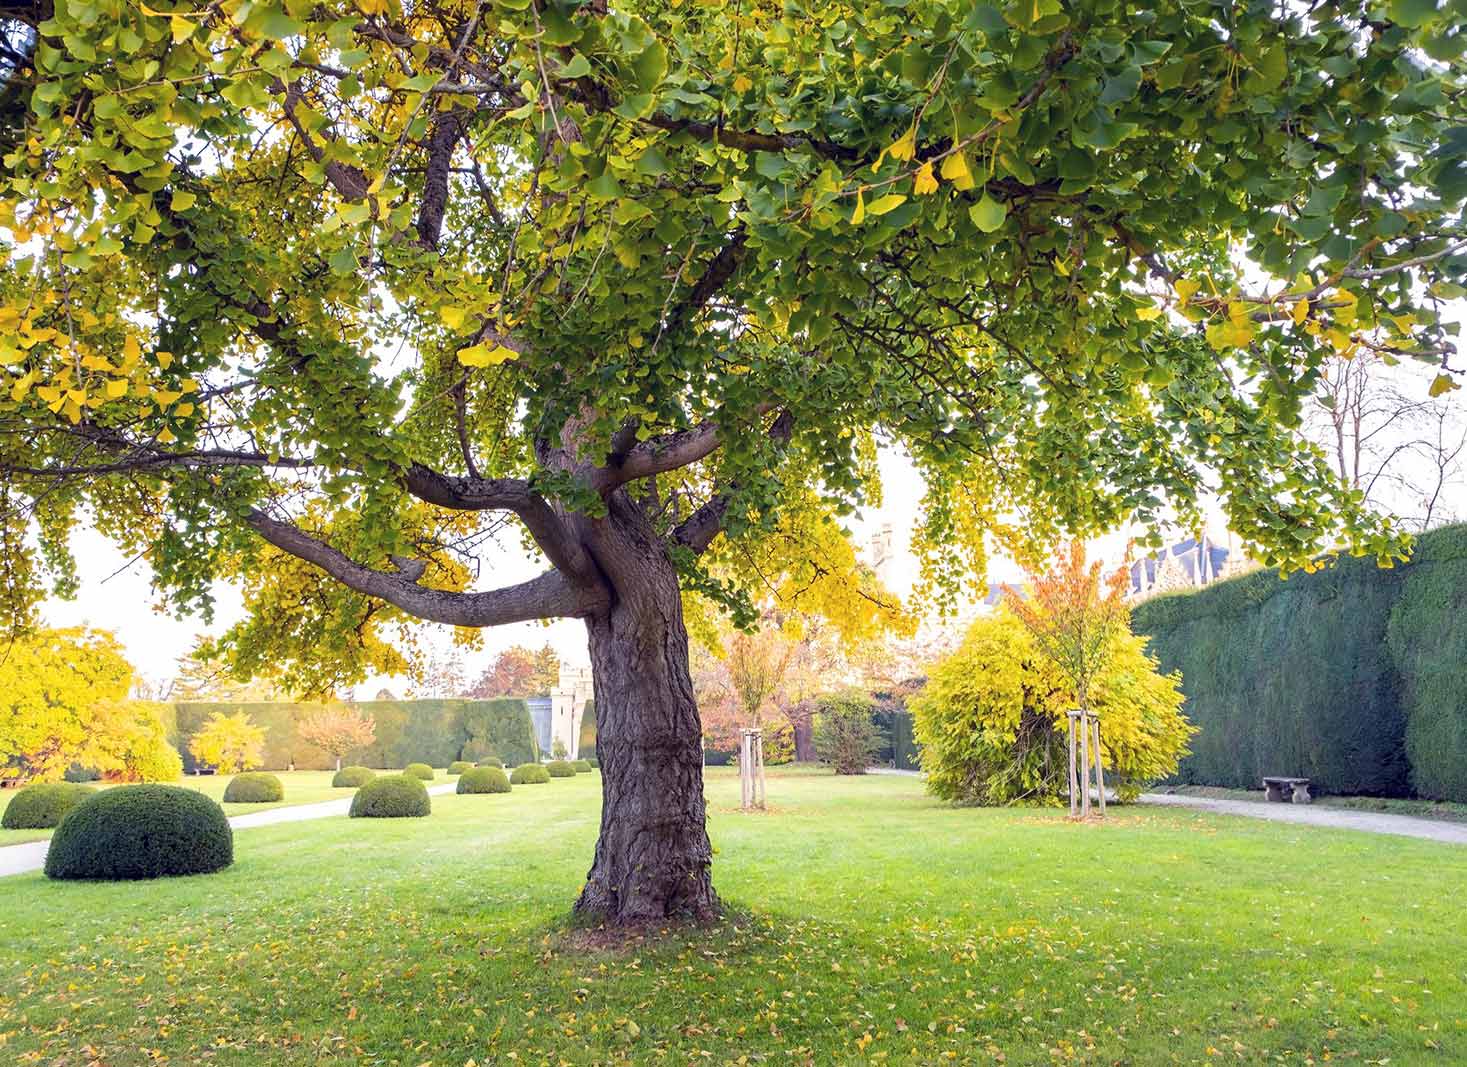 The impact of mature trees on property value